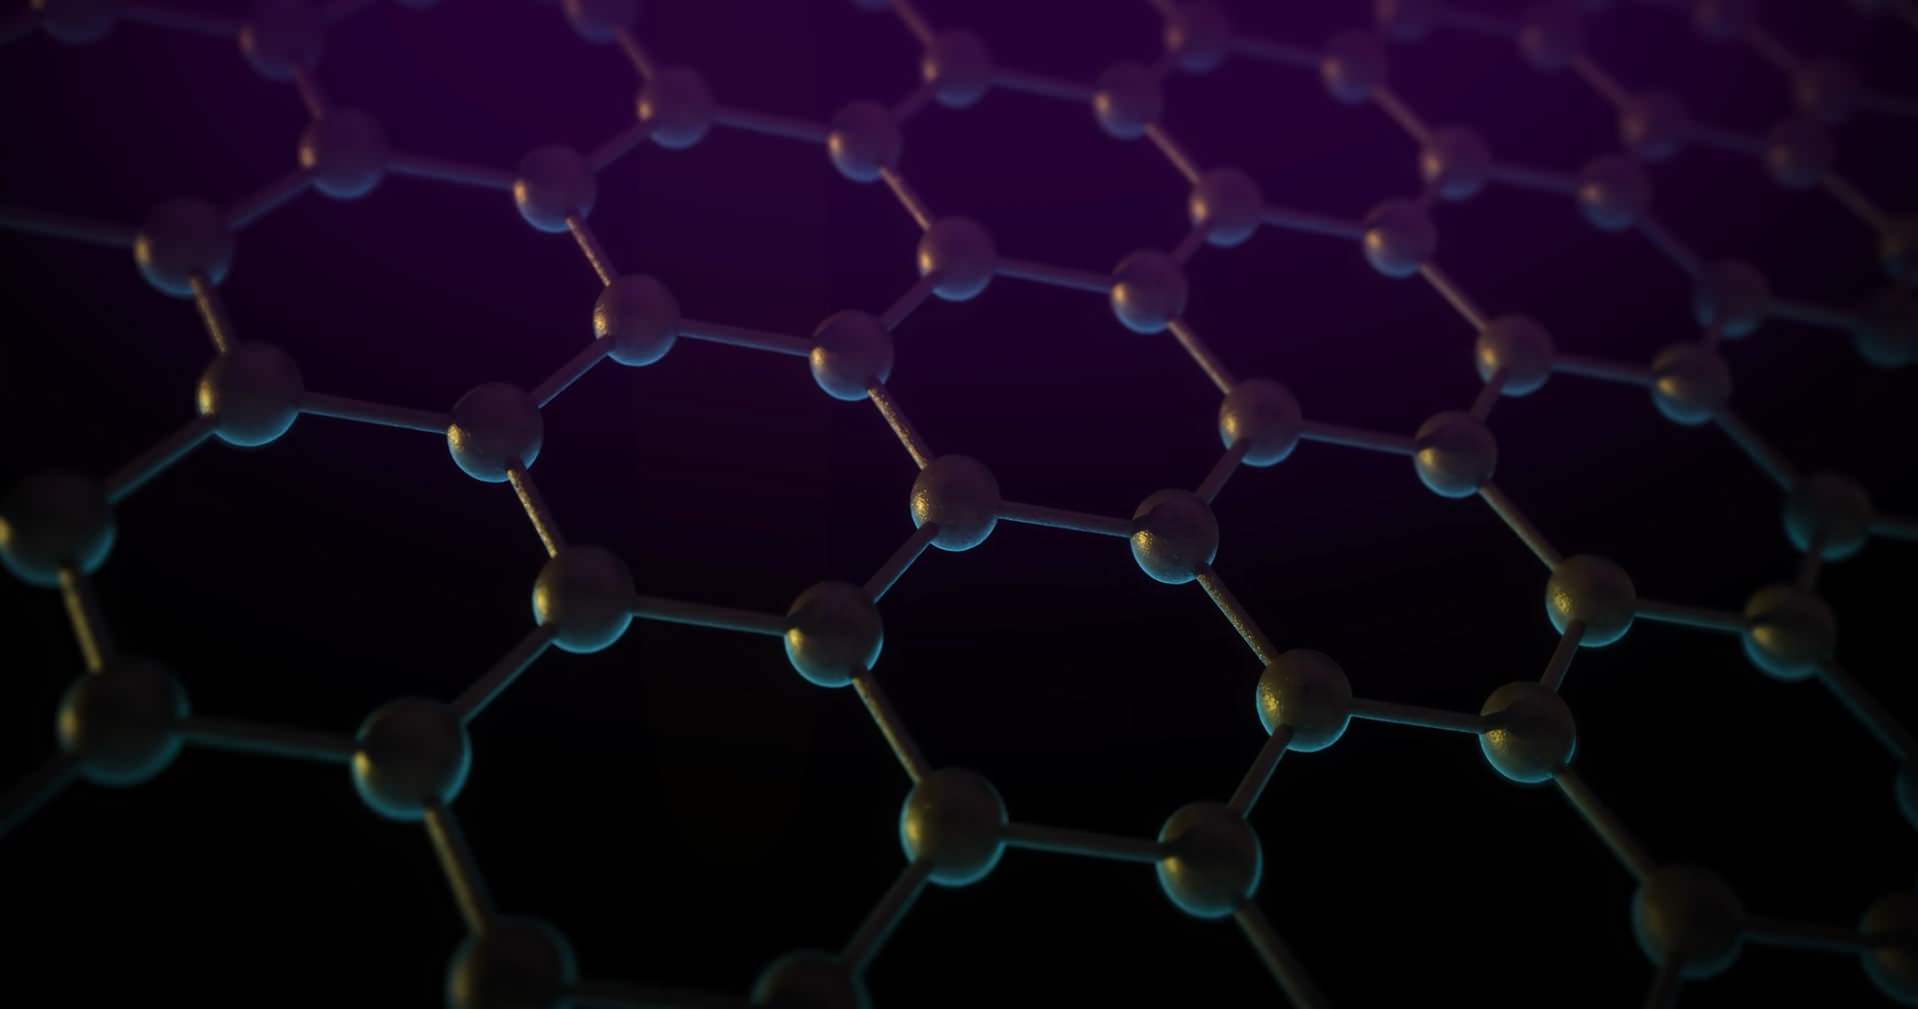 This image shows a 3D reconstruction of graphene - an excellent conductor of electron